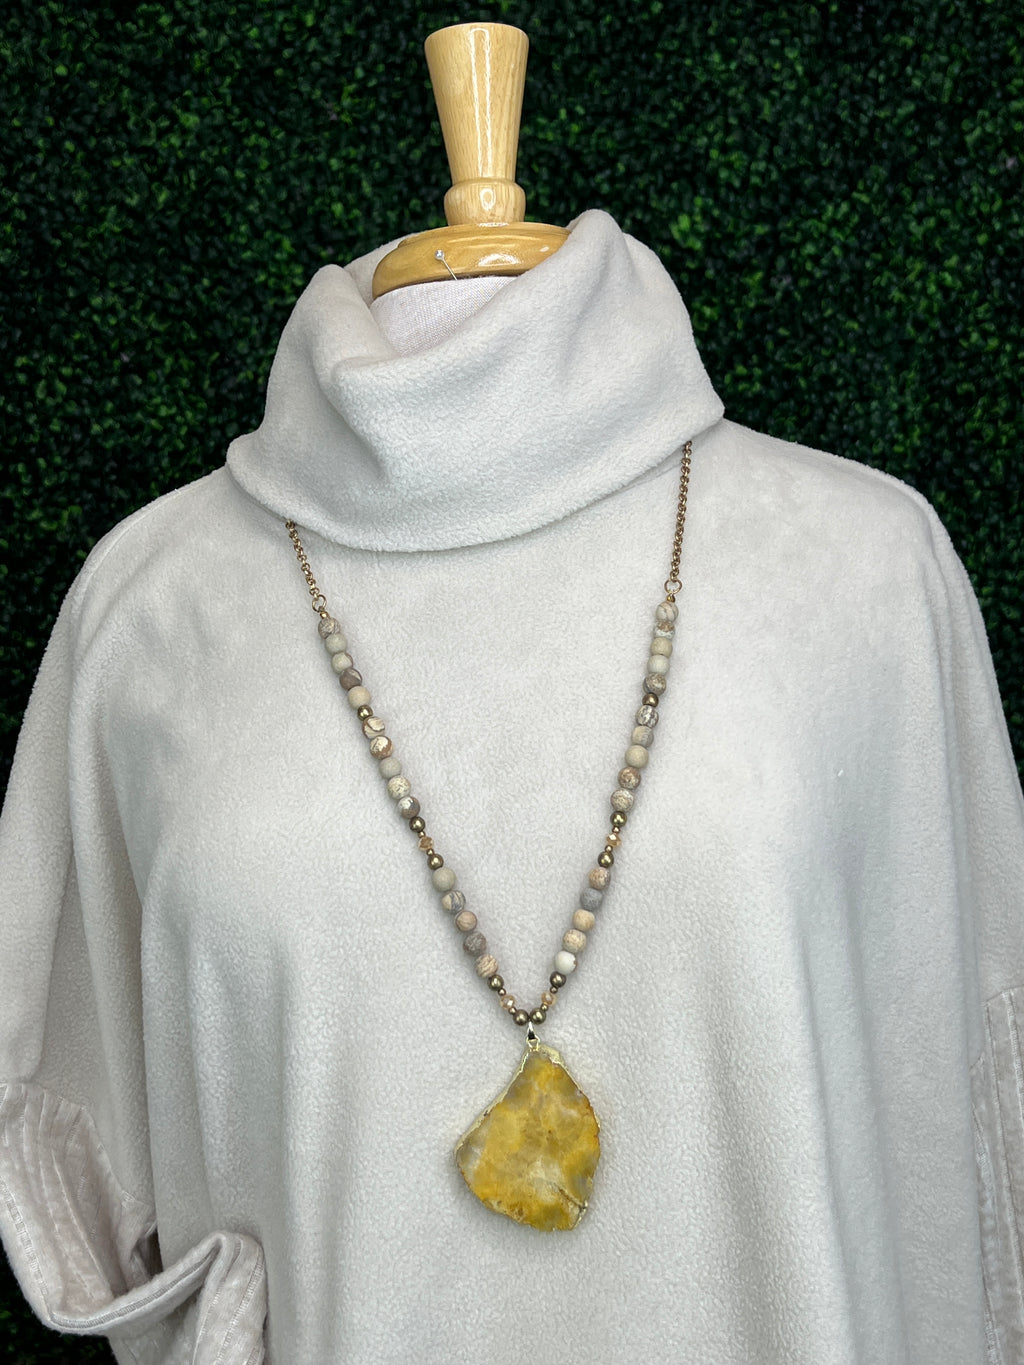 Long Gold & Natural Beaded Necklace With Citrine Stone Pendant